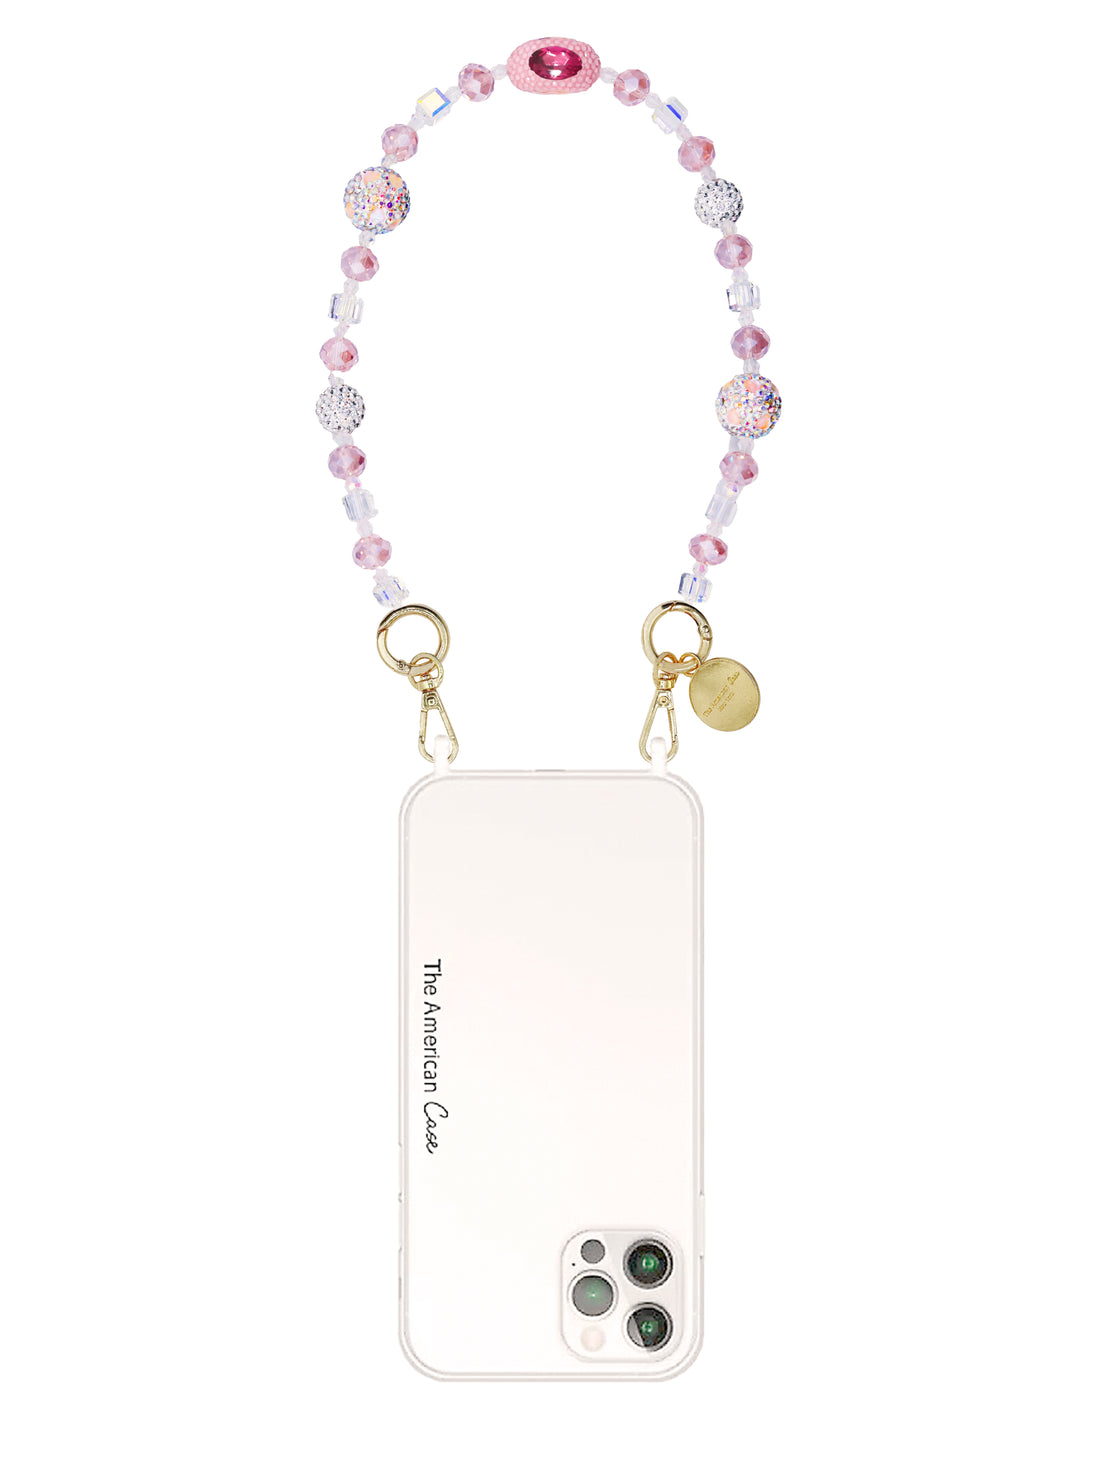 Caroline - Crystal Bead Bracelet Phone Chain With Golden Carabiners